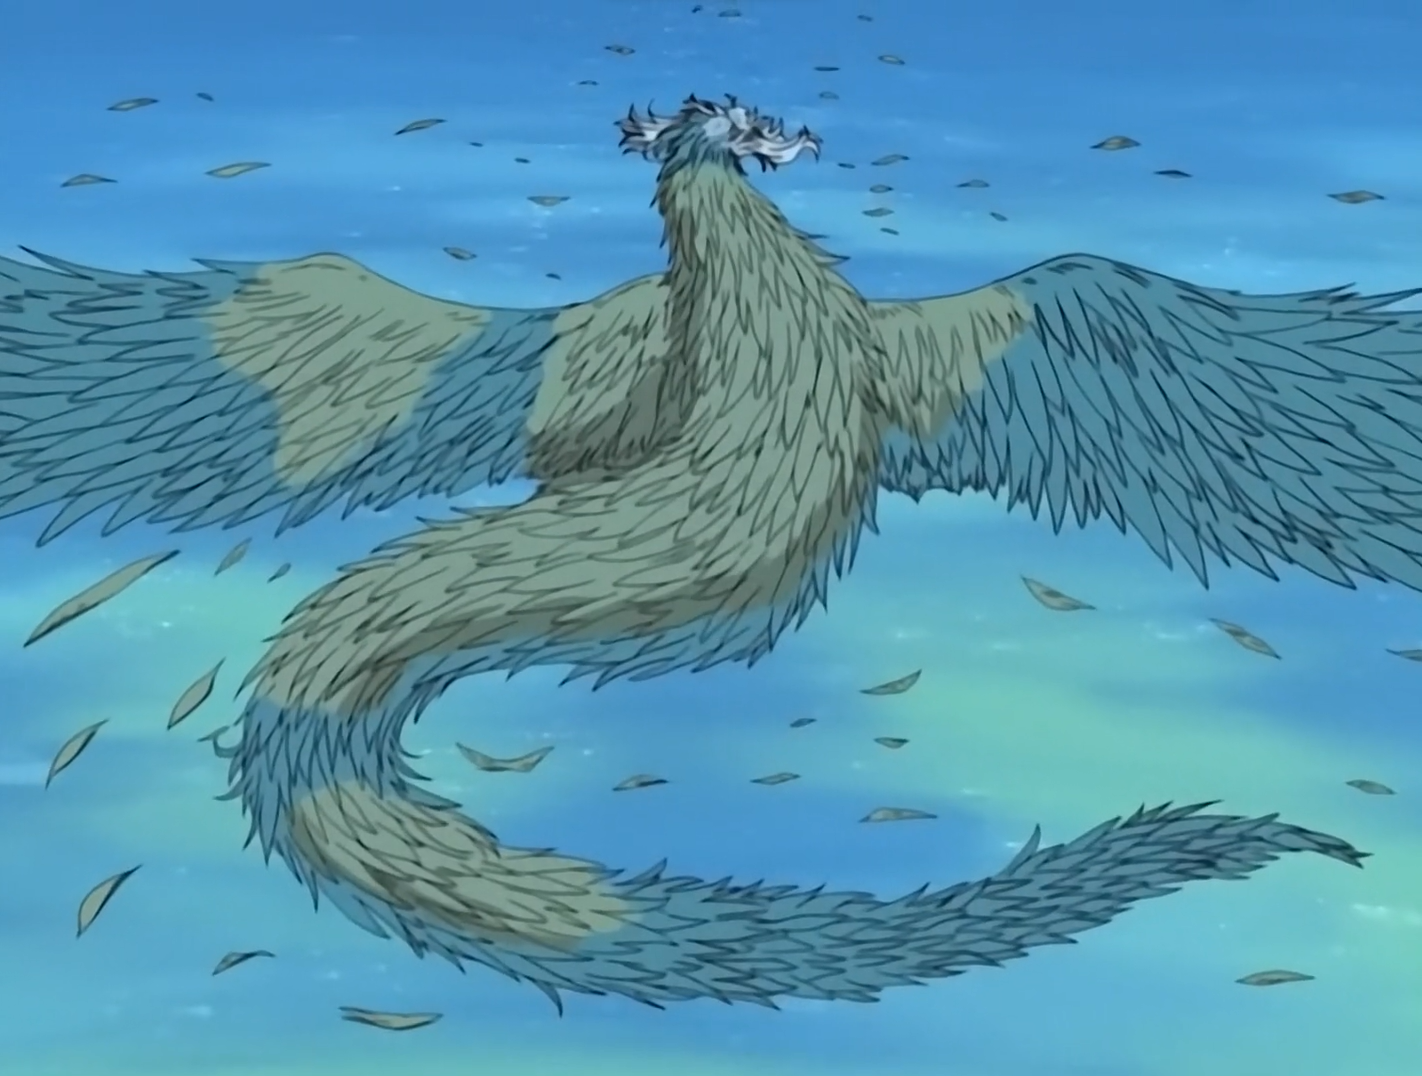 One Piece Great Millennium Dragon killed by gunshots from the Marines